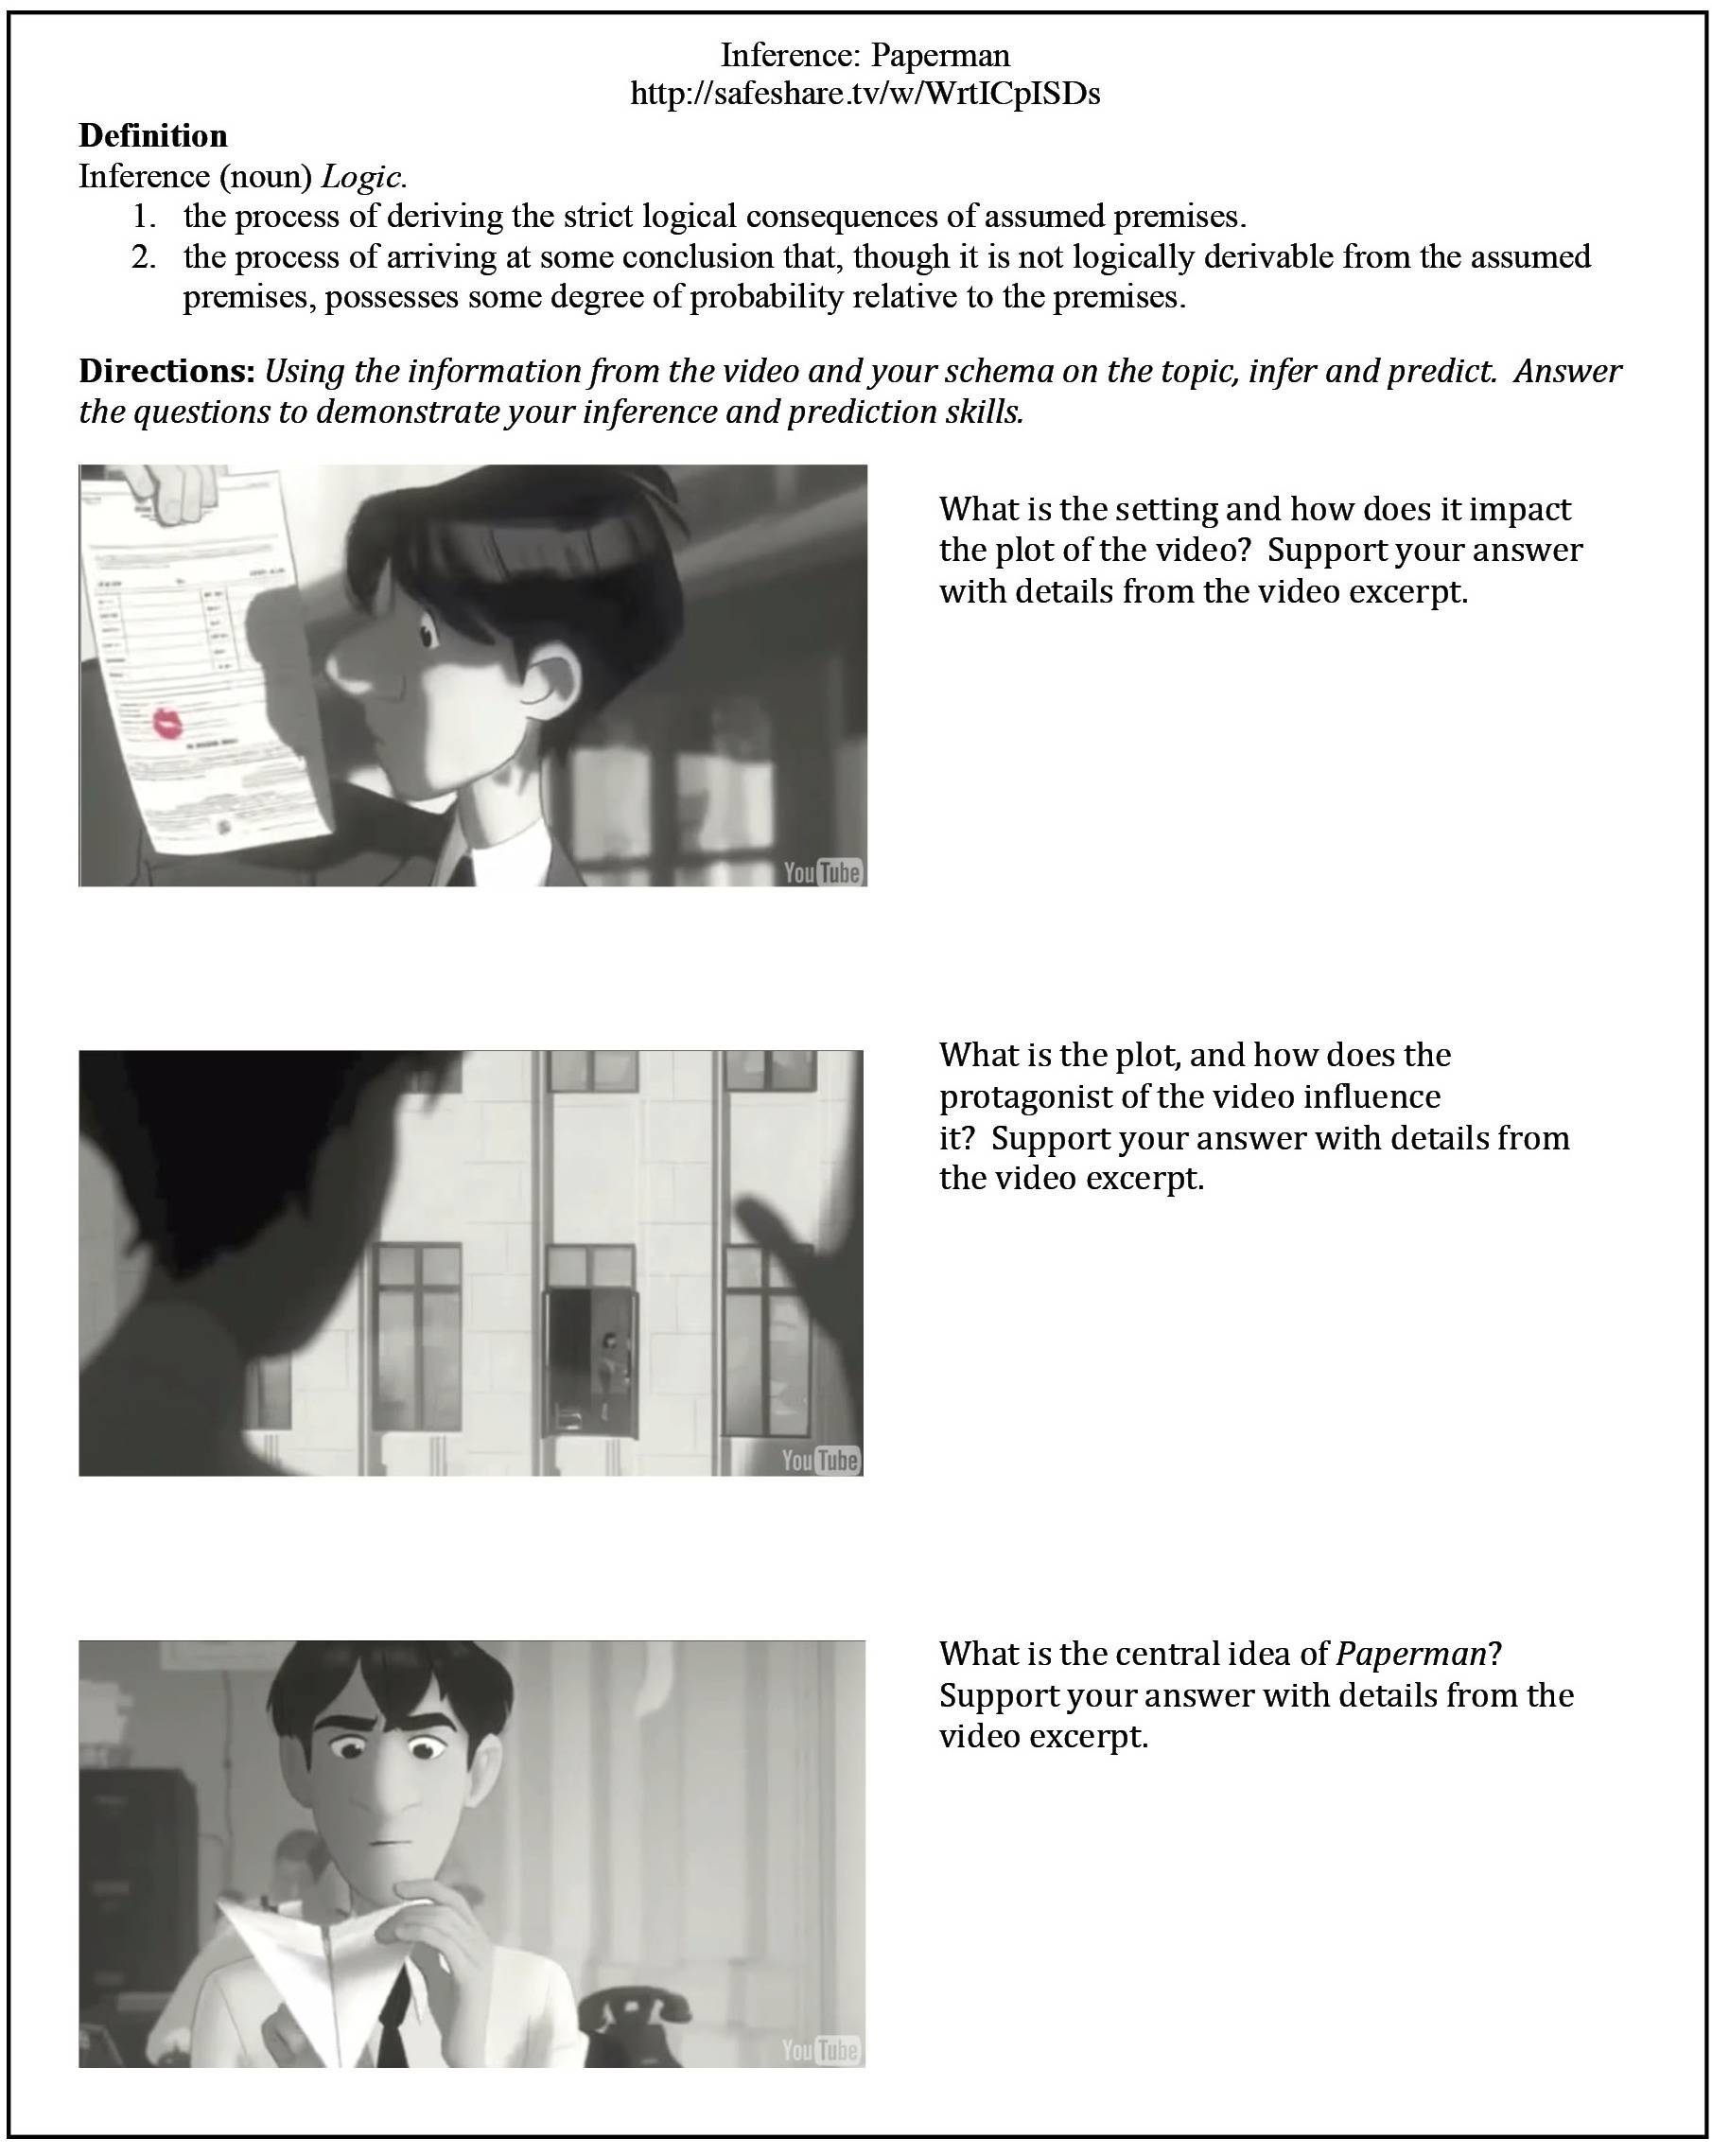 Inference Paperman - Sara Wiley Classroom - Student Handout